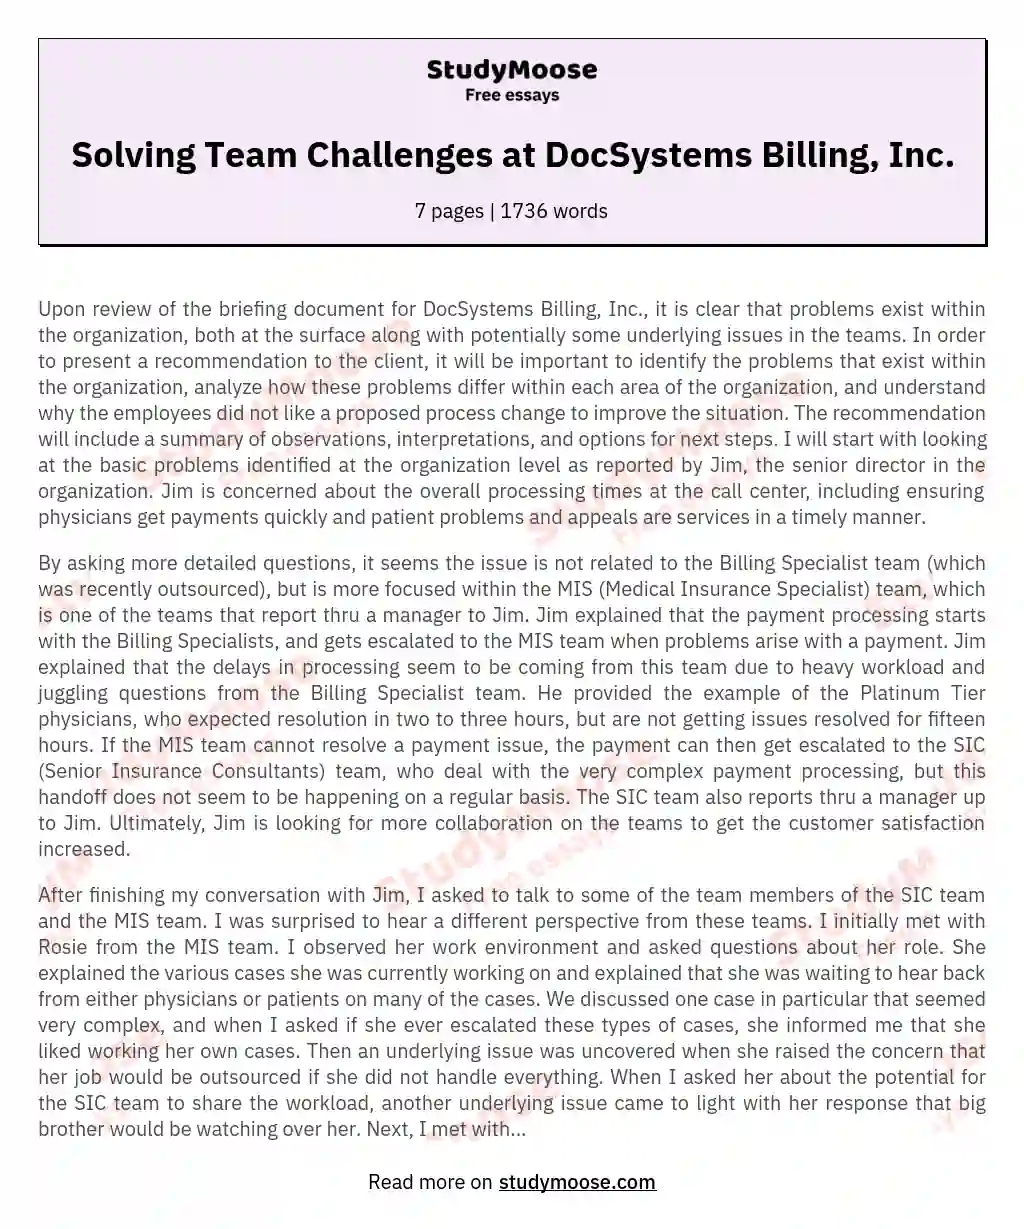 Solving Team Challenges at DocSystems Billing, Inc. essay